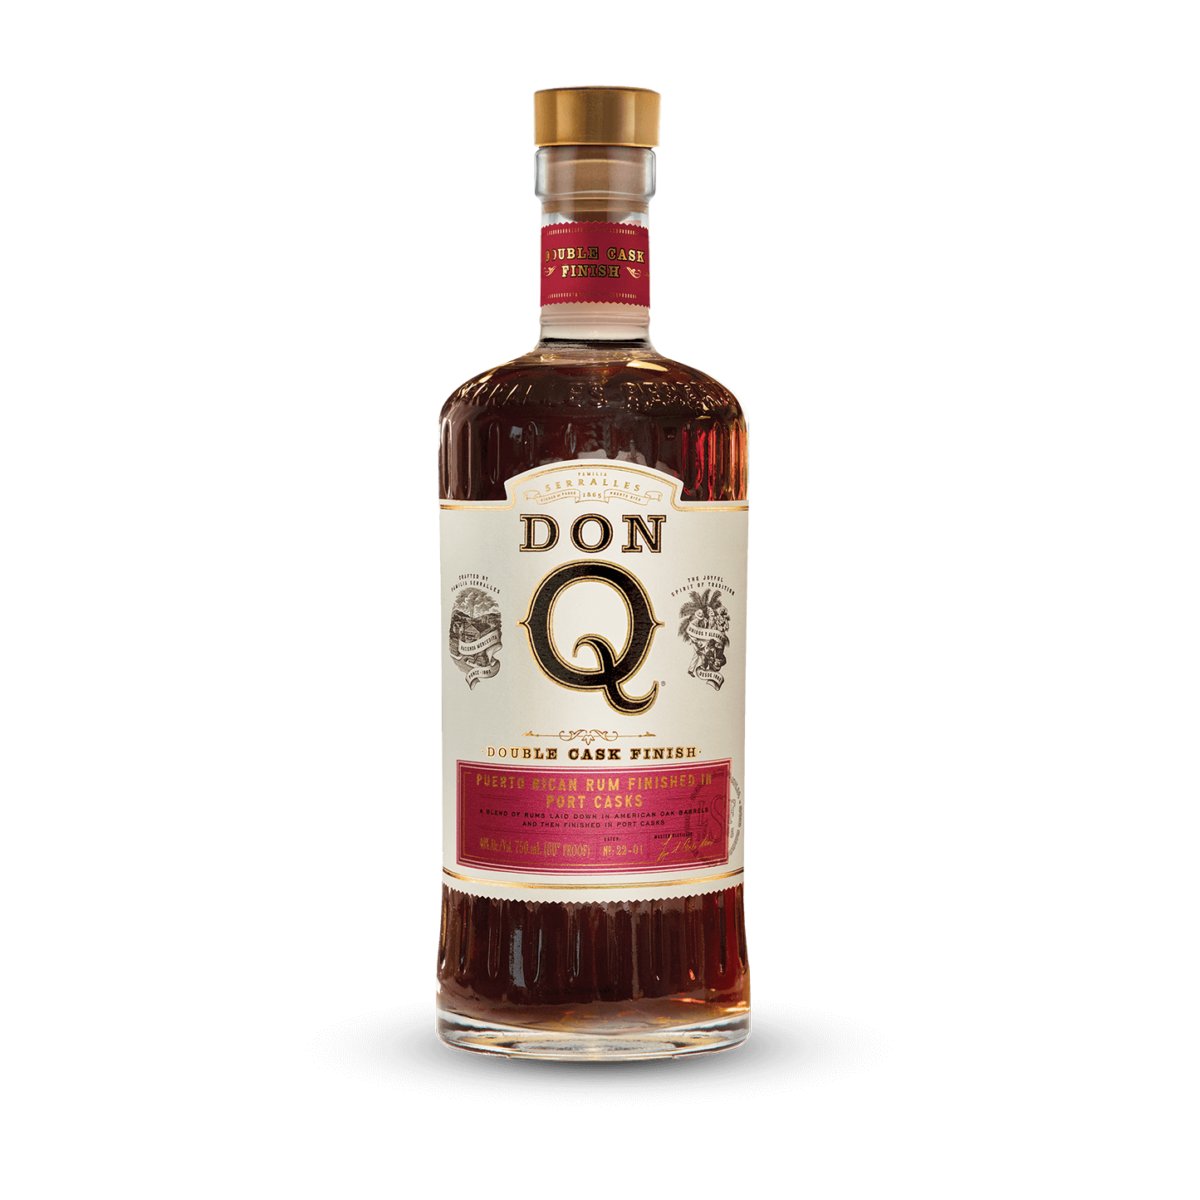 Check out our award-winning Port Double Finish Aged Cask